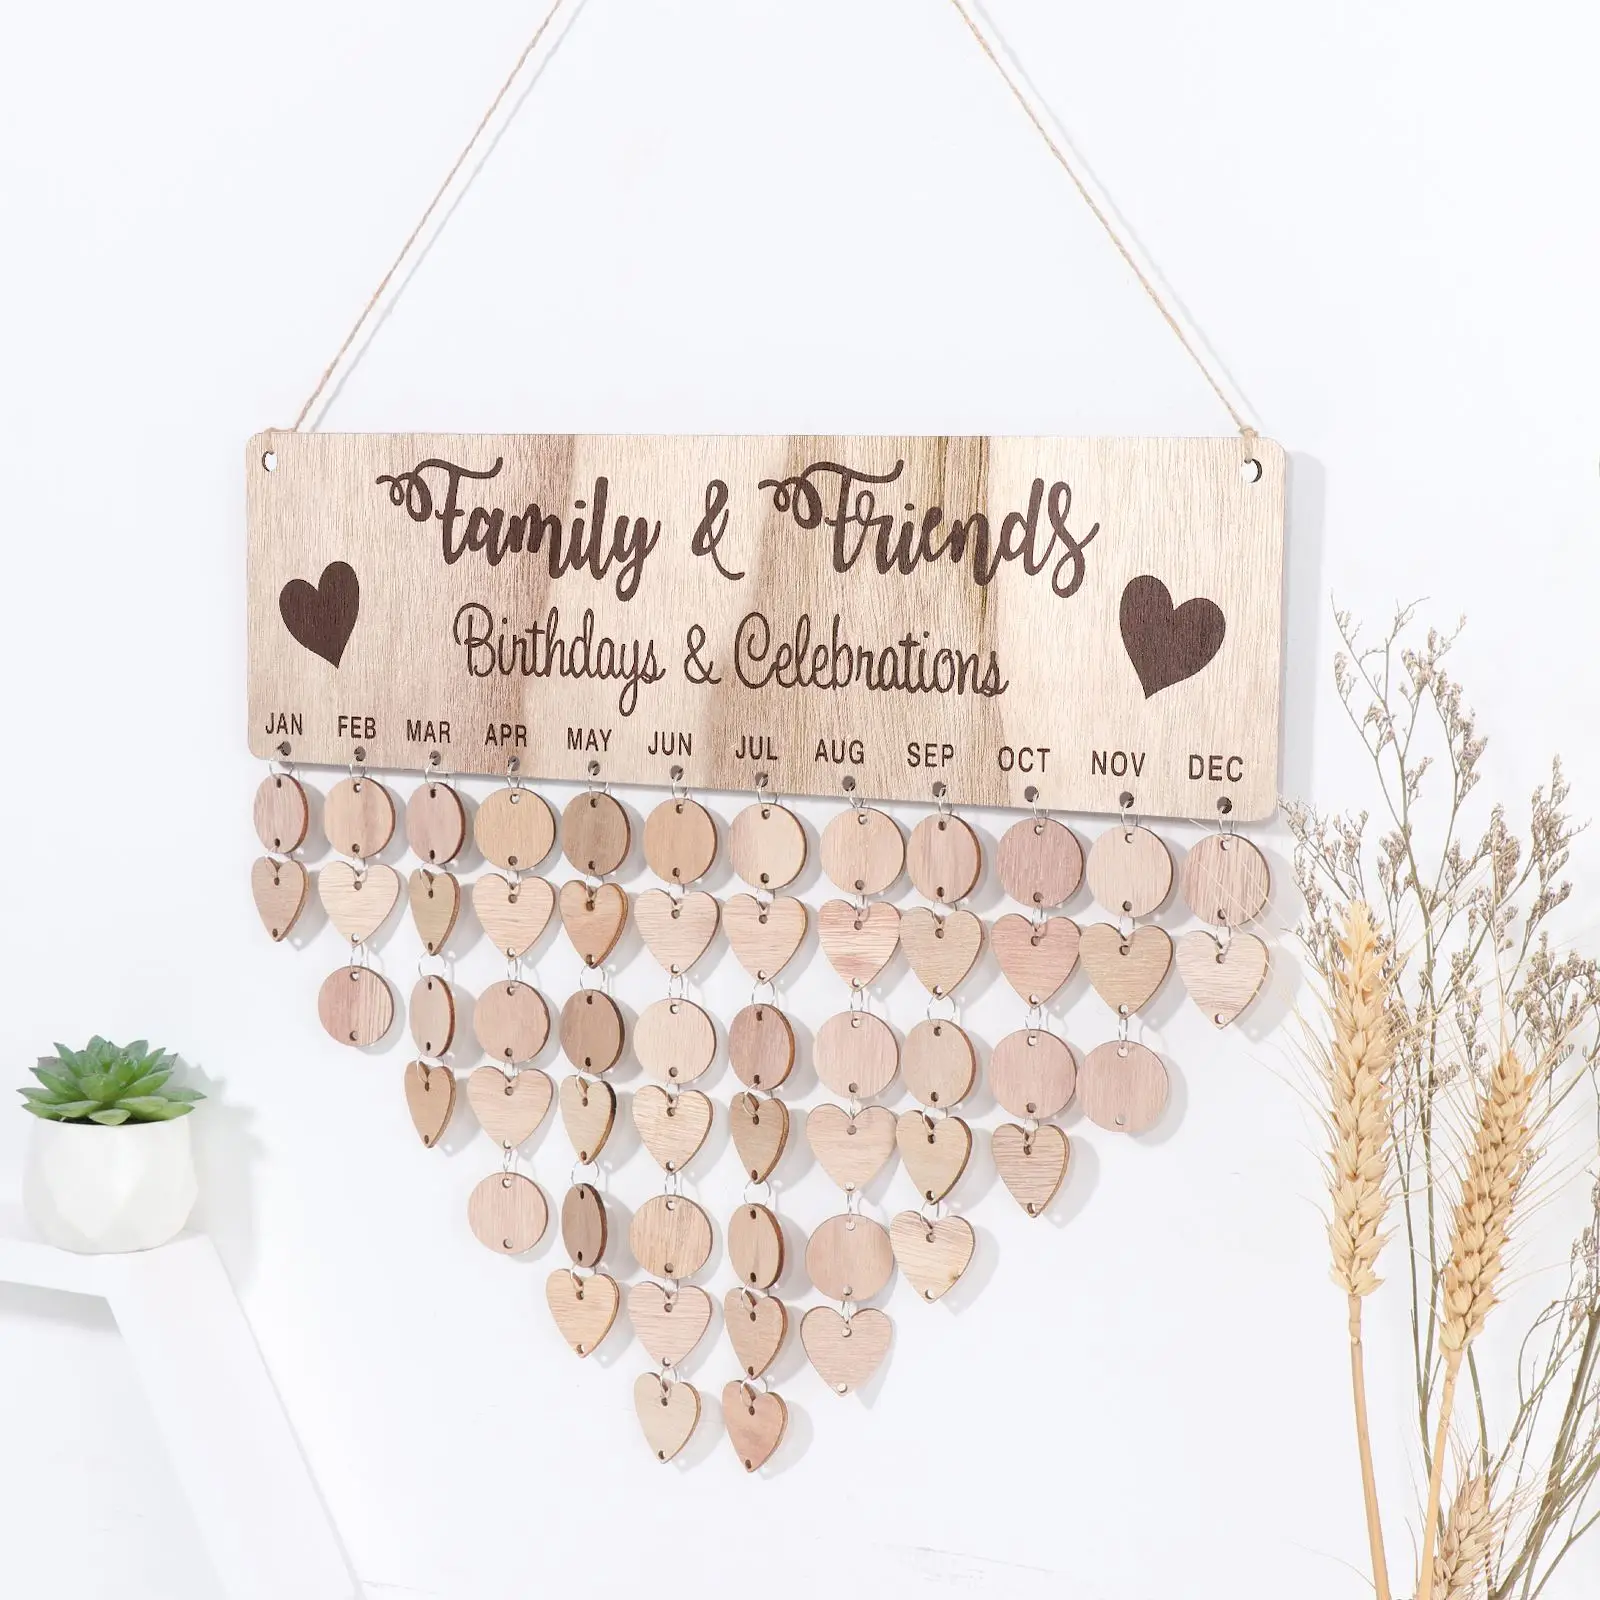 Calendar Birthday Family Board Wooden Hanging Reminder Wall Plaque Diy Datehome Reminding Wood Friendsgifts Menology Decor